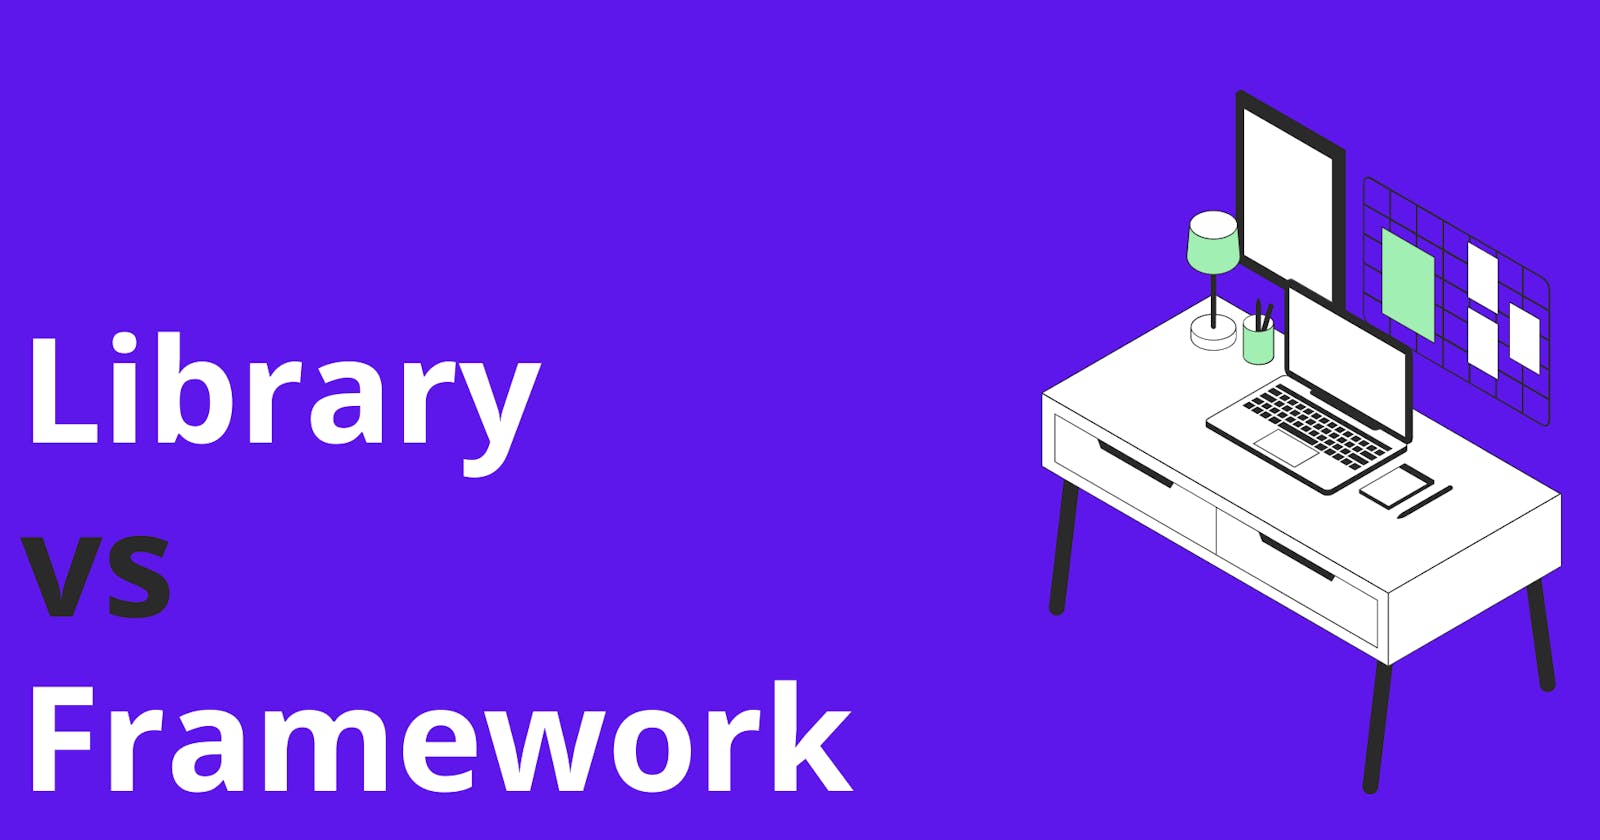 What is the difference between Library vs Framework?